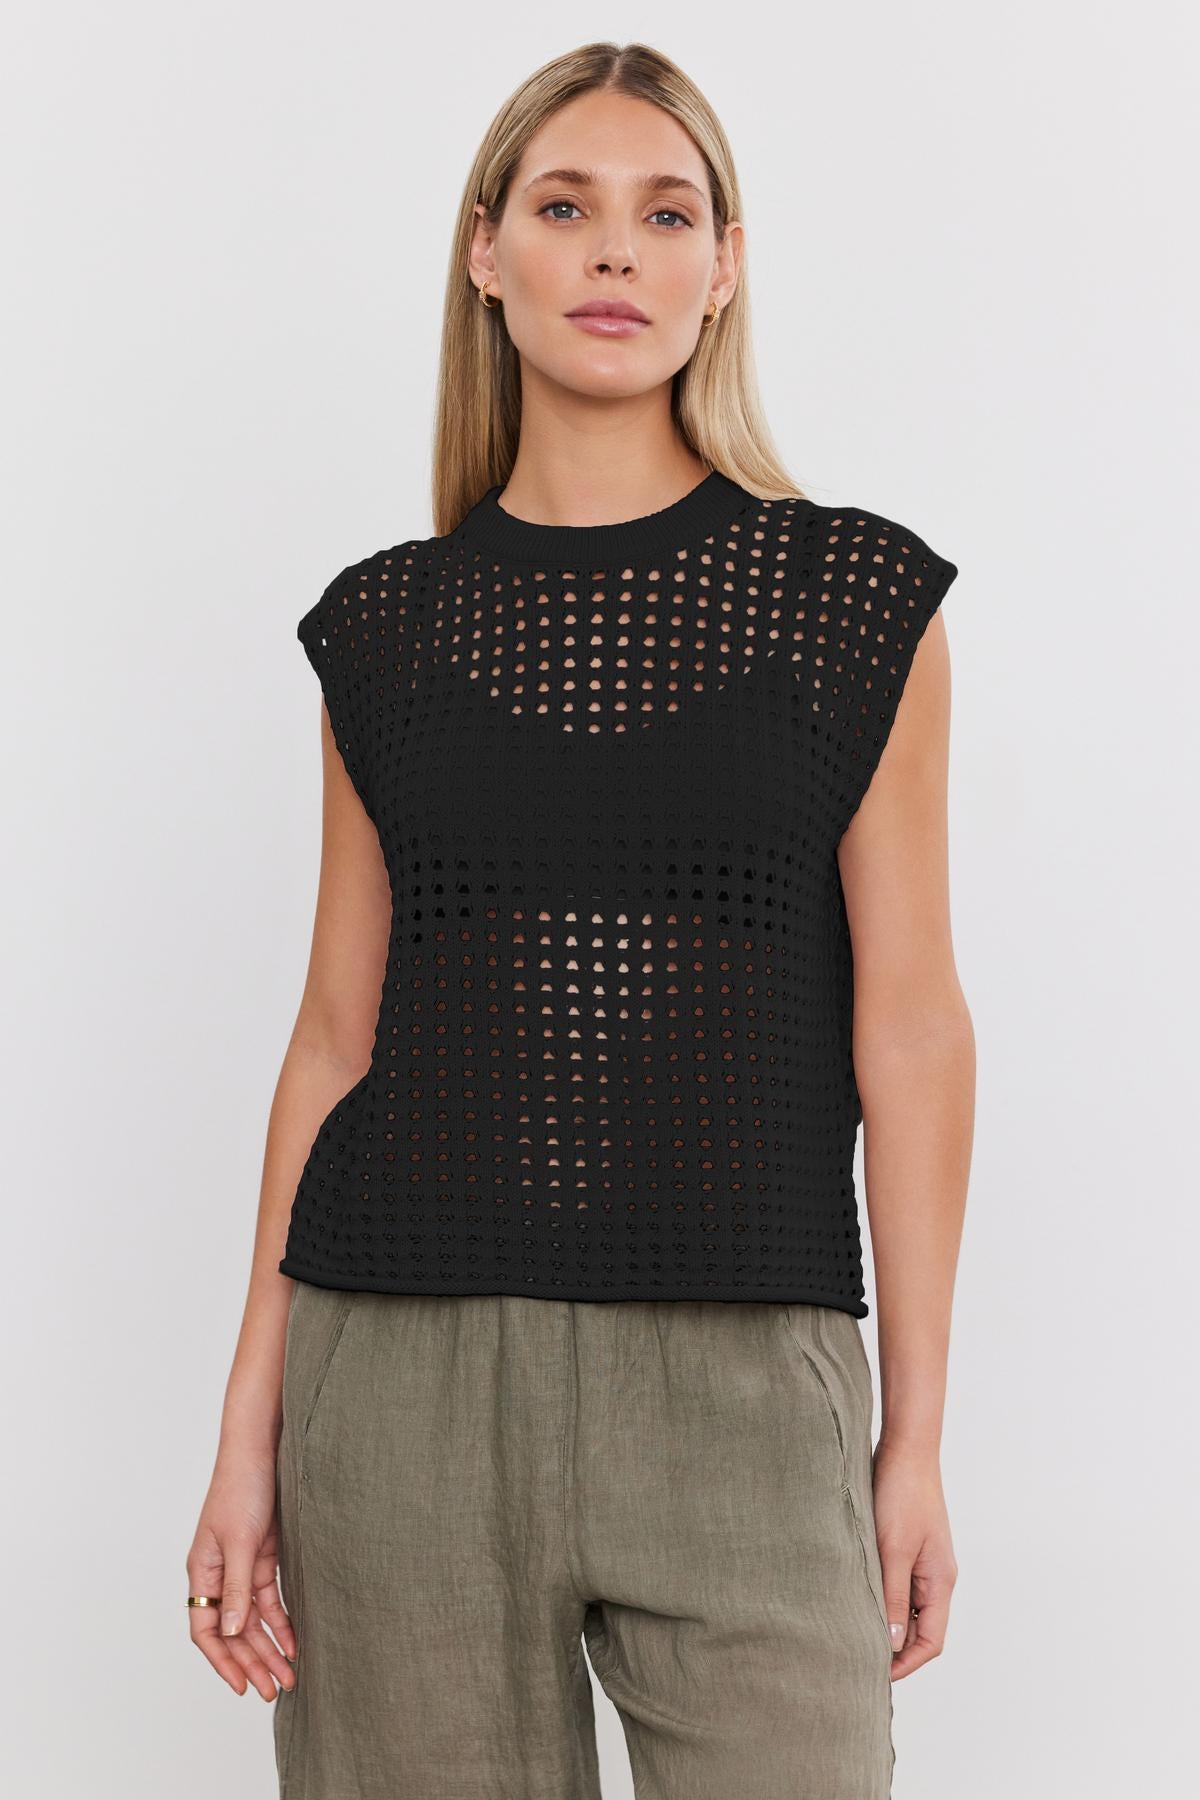   A person with long blonde hair is wearing a black, sleeveless, eyelet knit MAISON SWEATER by Velvet by Graham & Spencer over a black bra, paired with loose-fitting khaki pants. The top features a cropped silhouette perfect for summer. The background is plain white. 